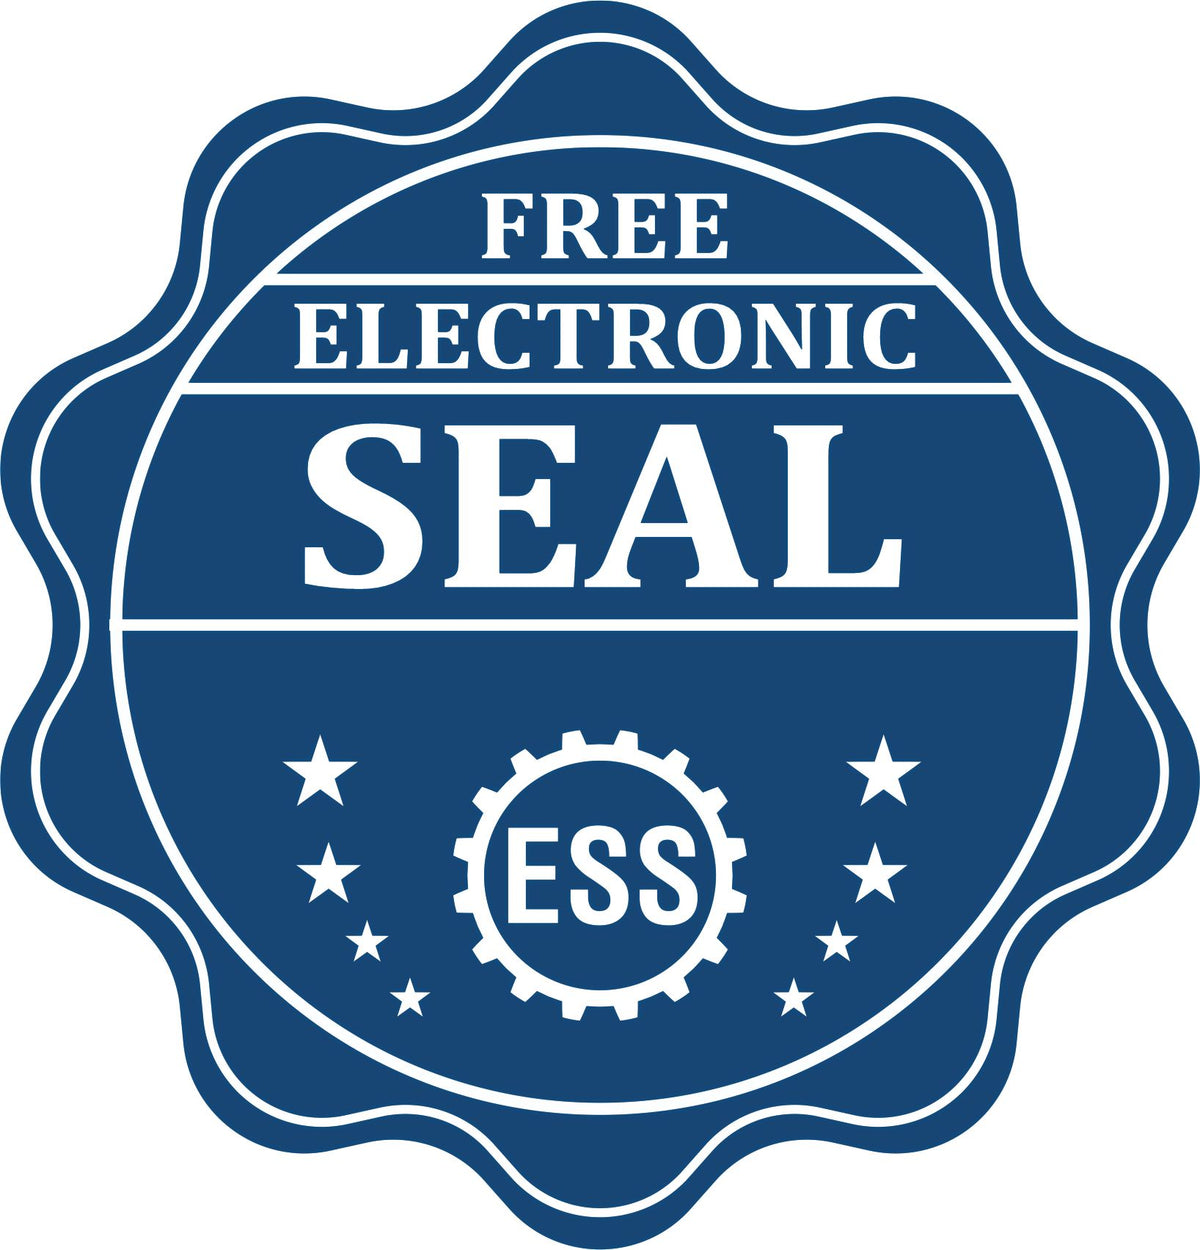 A badge showing a free electronic seal for the Handheld Tennessee Professional Engineer Embosser with stars and the ESS gear on the emblem.